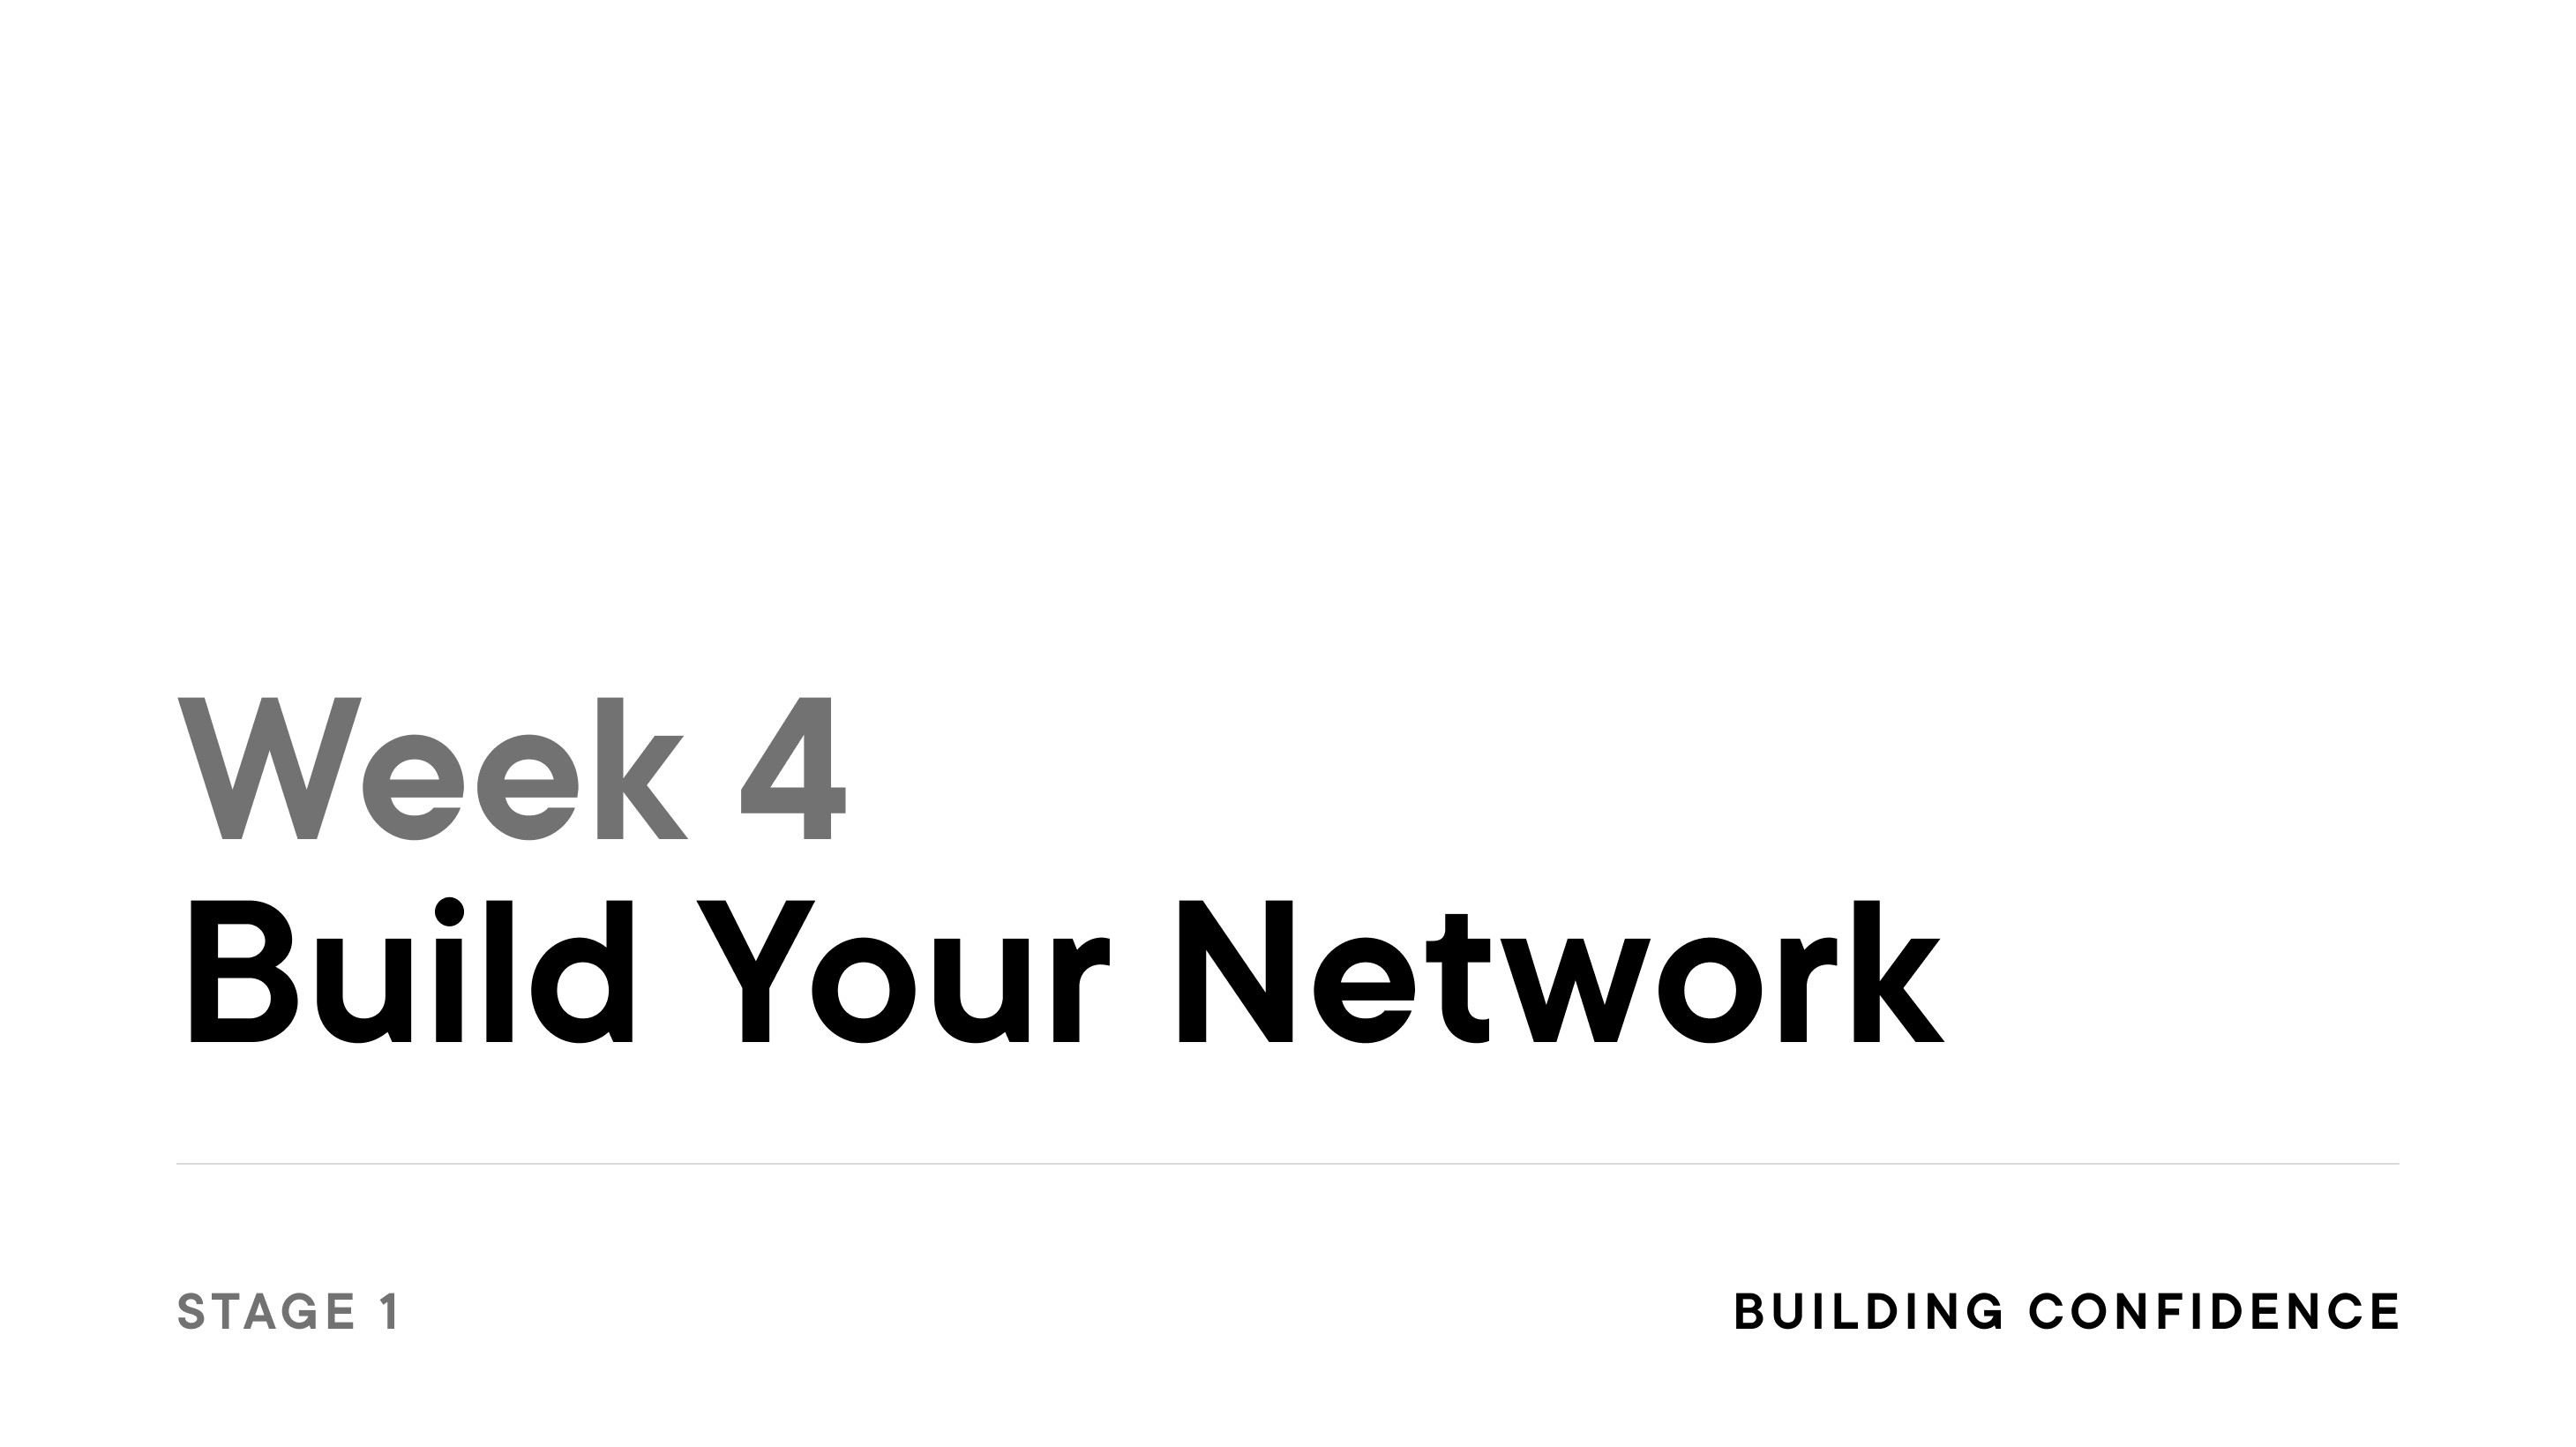 Week 4: Build Your Network